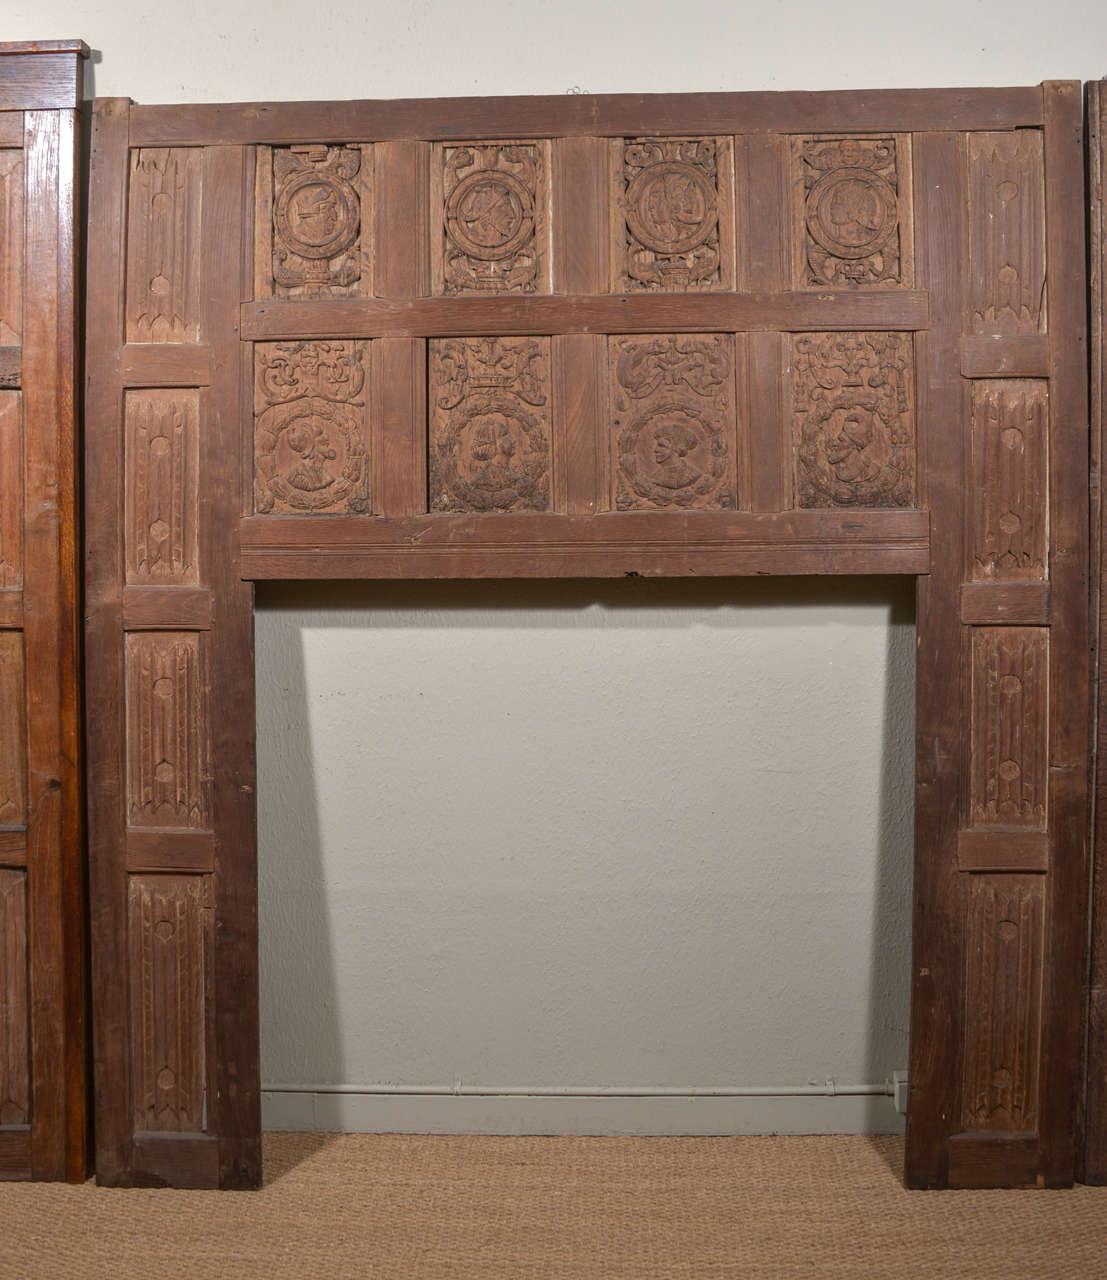 Set of 11 Elizabethan Period carved wooden boiserie panels, circa 1543-1600, originally from the royal residence at the Old Priory Manor in Dartford, Kent.

Panels measure:

29 1/2